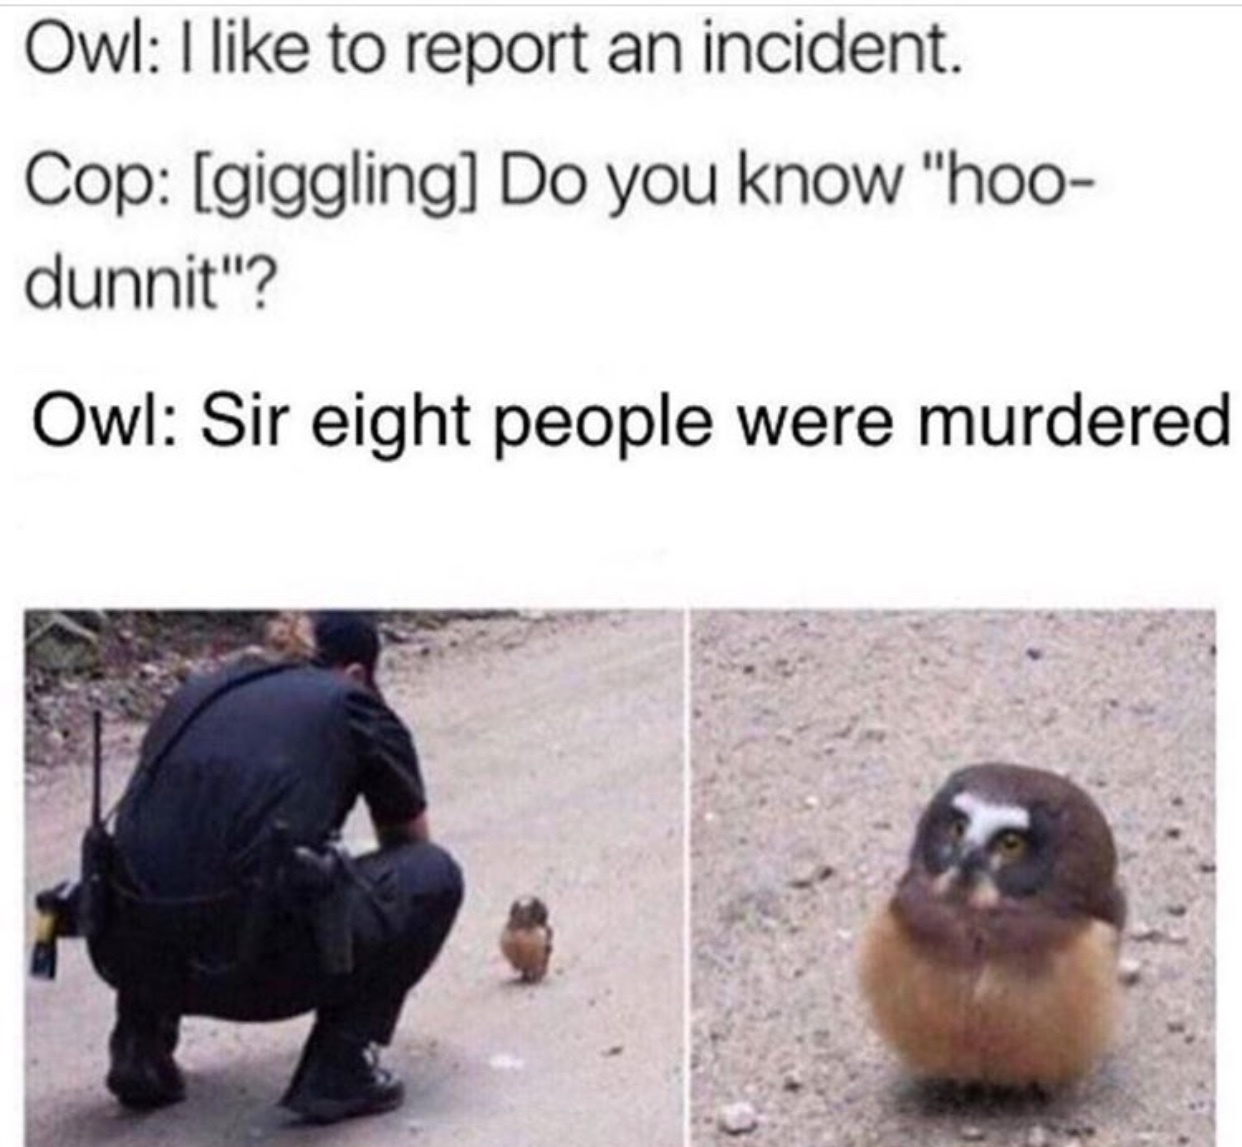 hoo dunnit - Owl I to report an incident. Cop giggling Do you know "hoo dunnit"? Owl Sir eight people were murdered